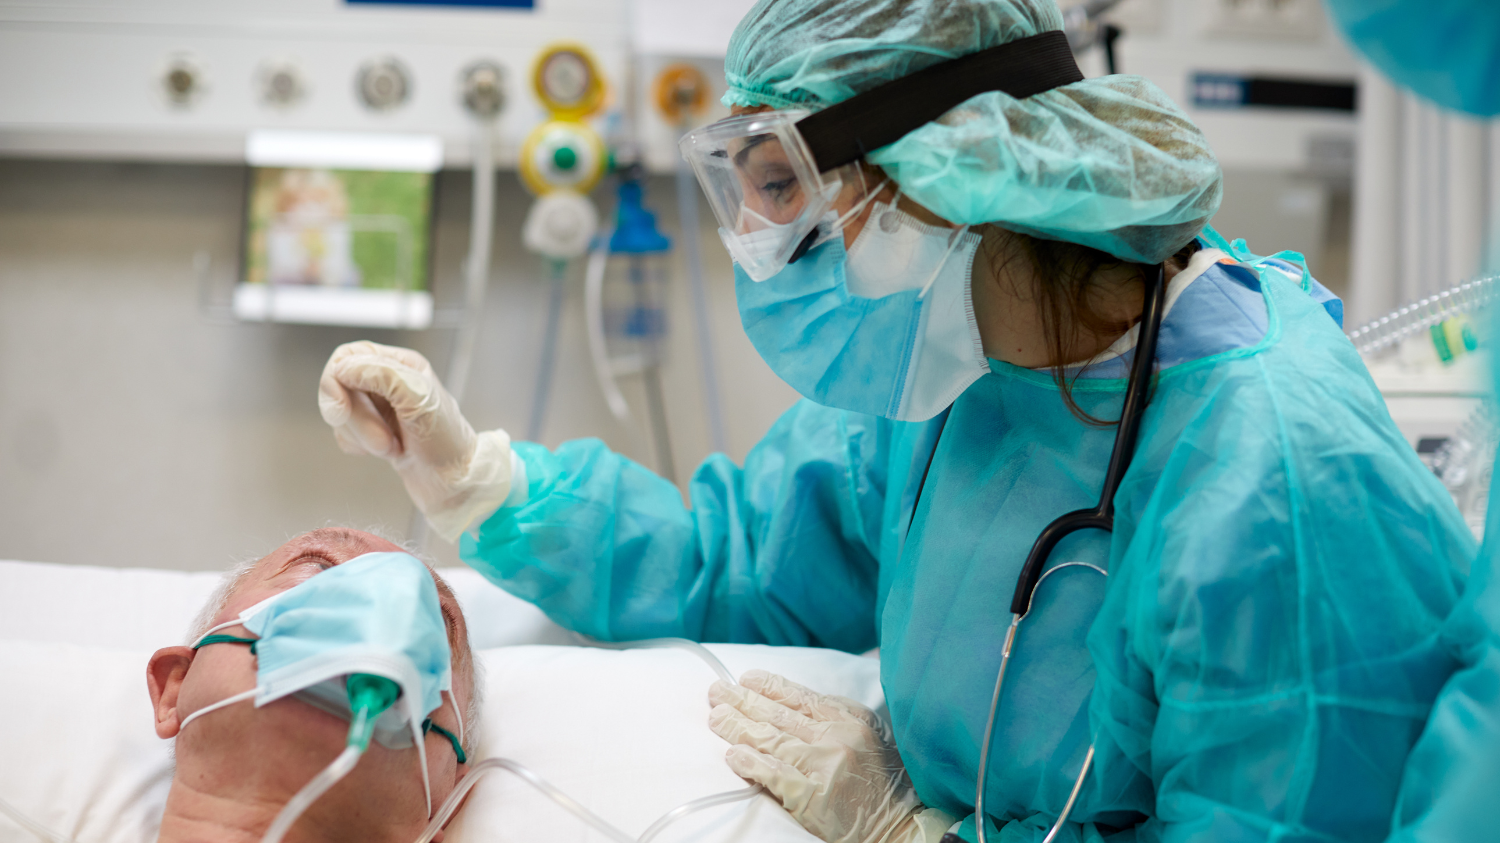 A nurse in PPE tends to a patient